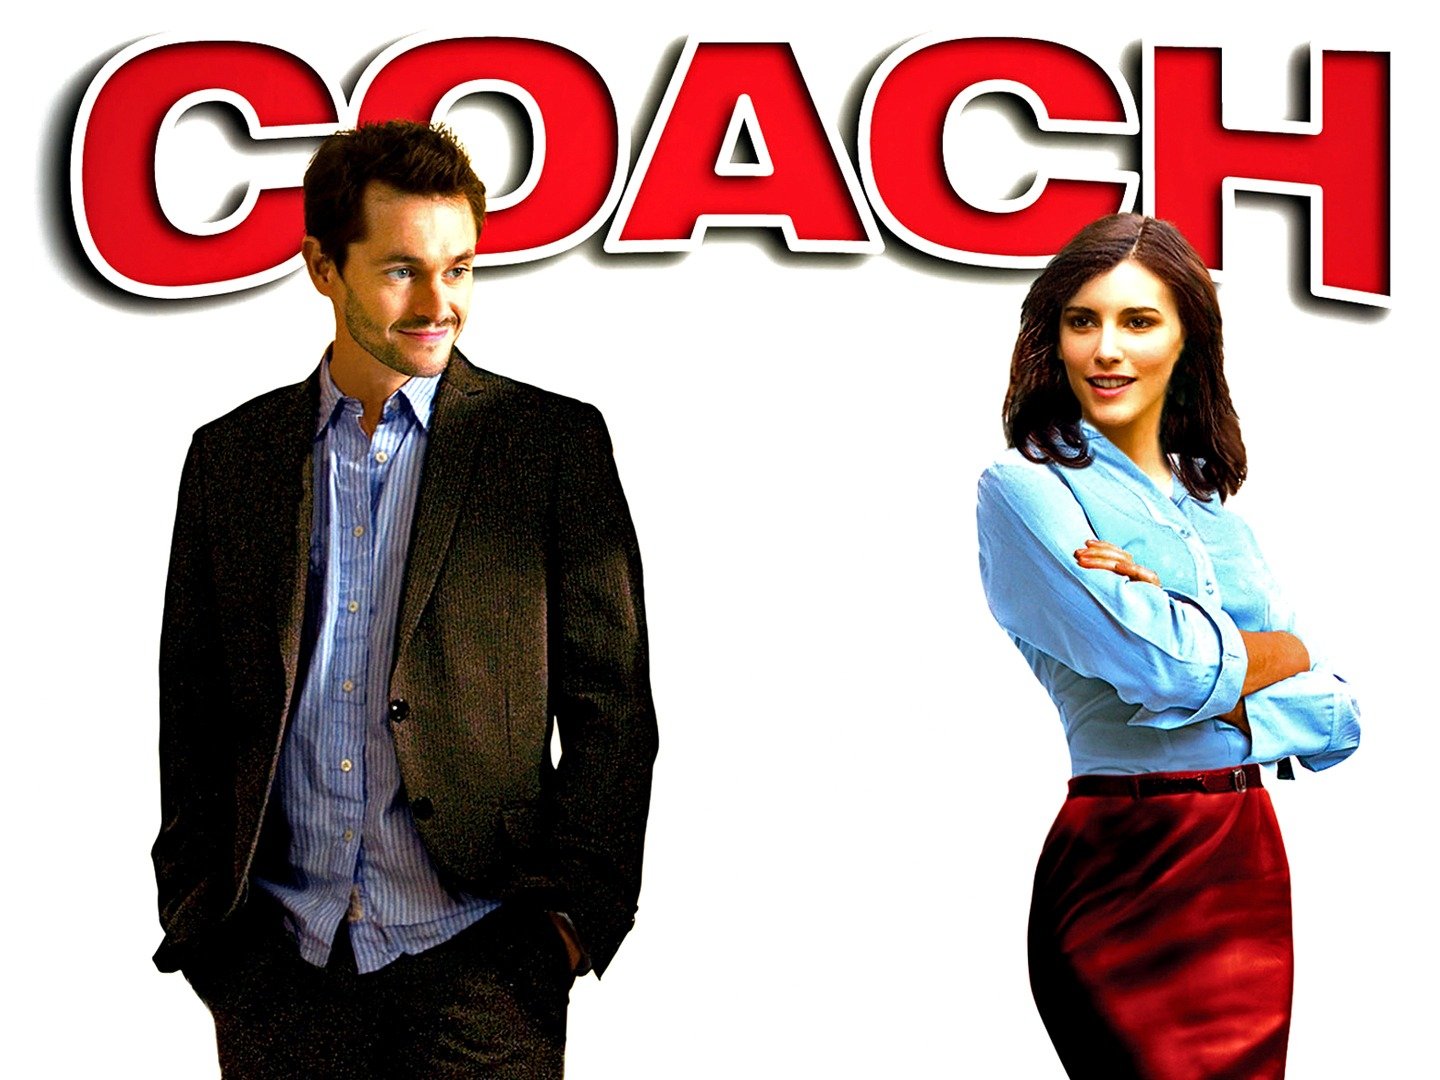 Coach (2010) Rotten Tomatoes